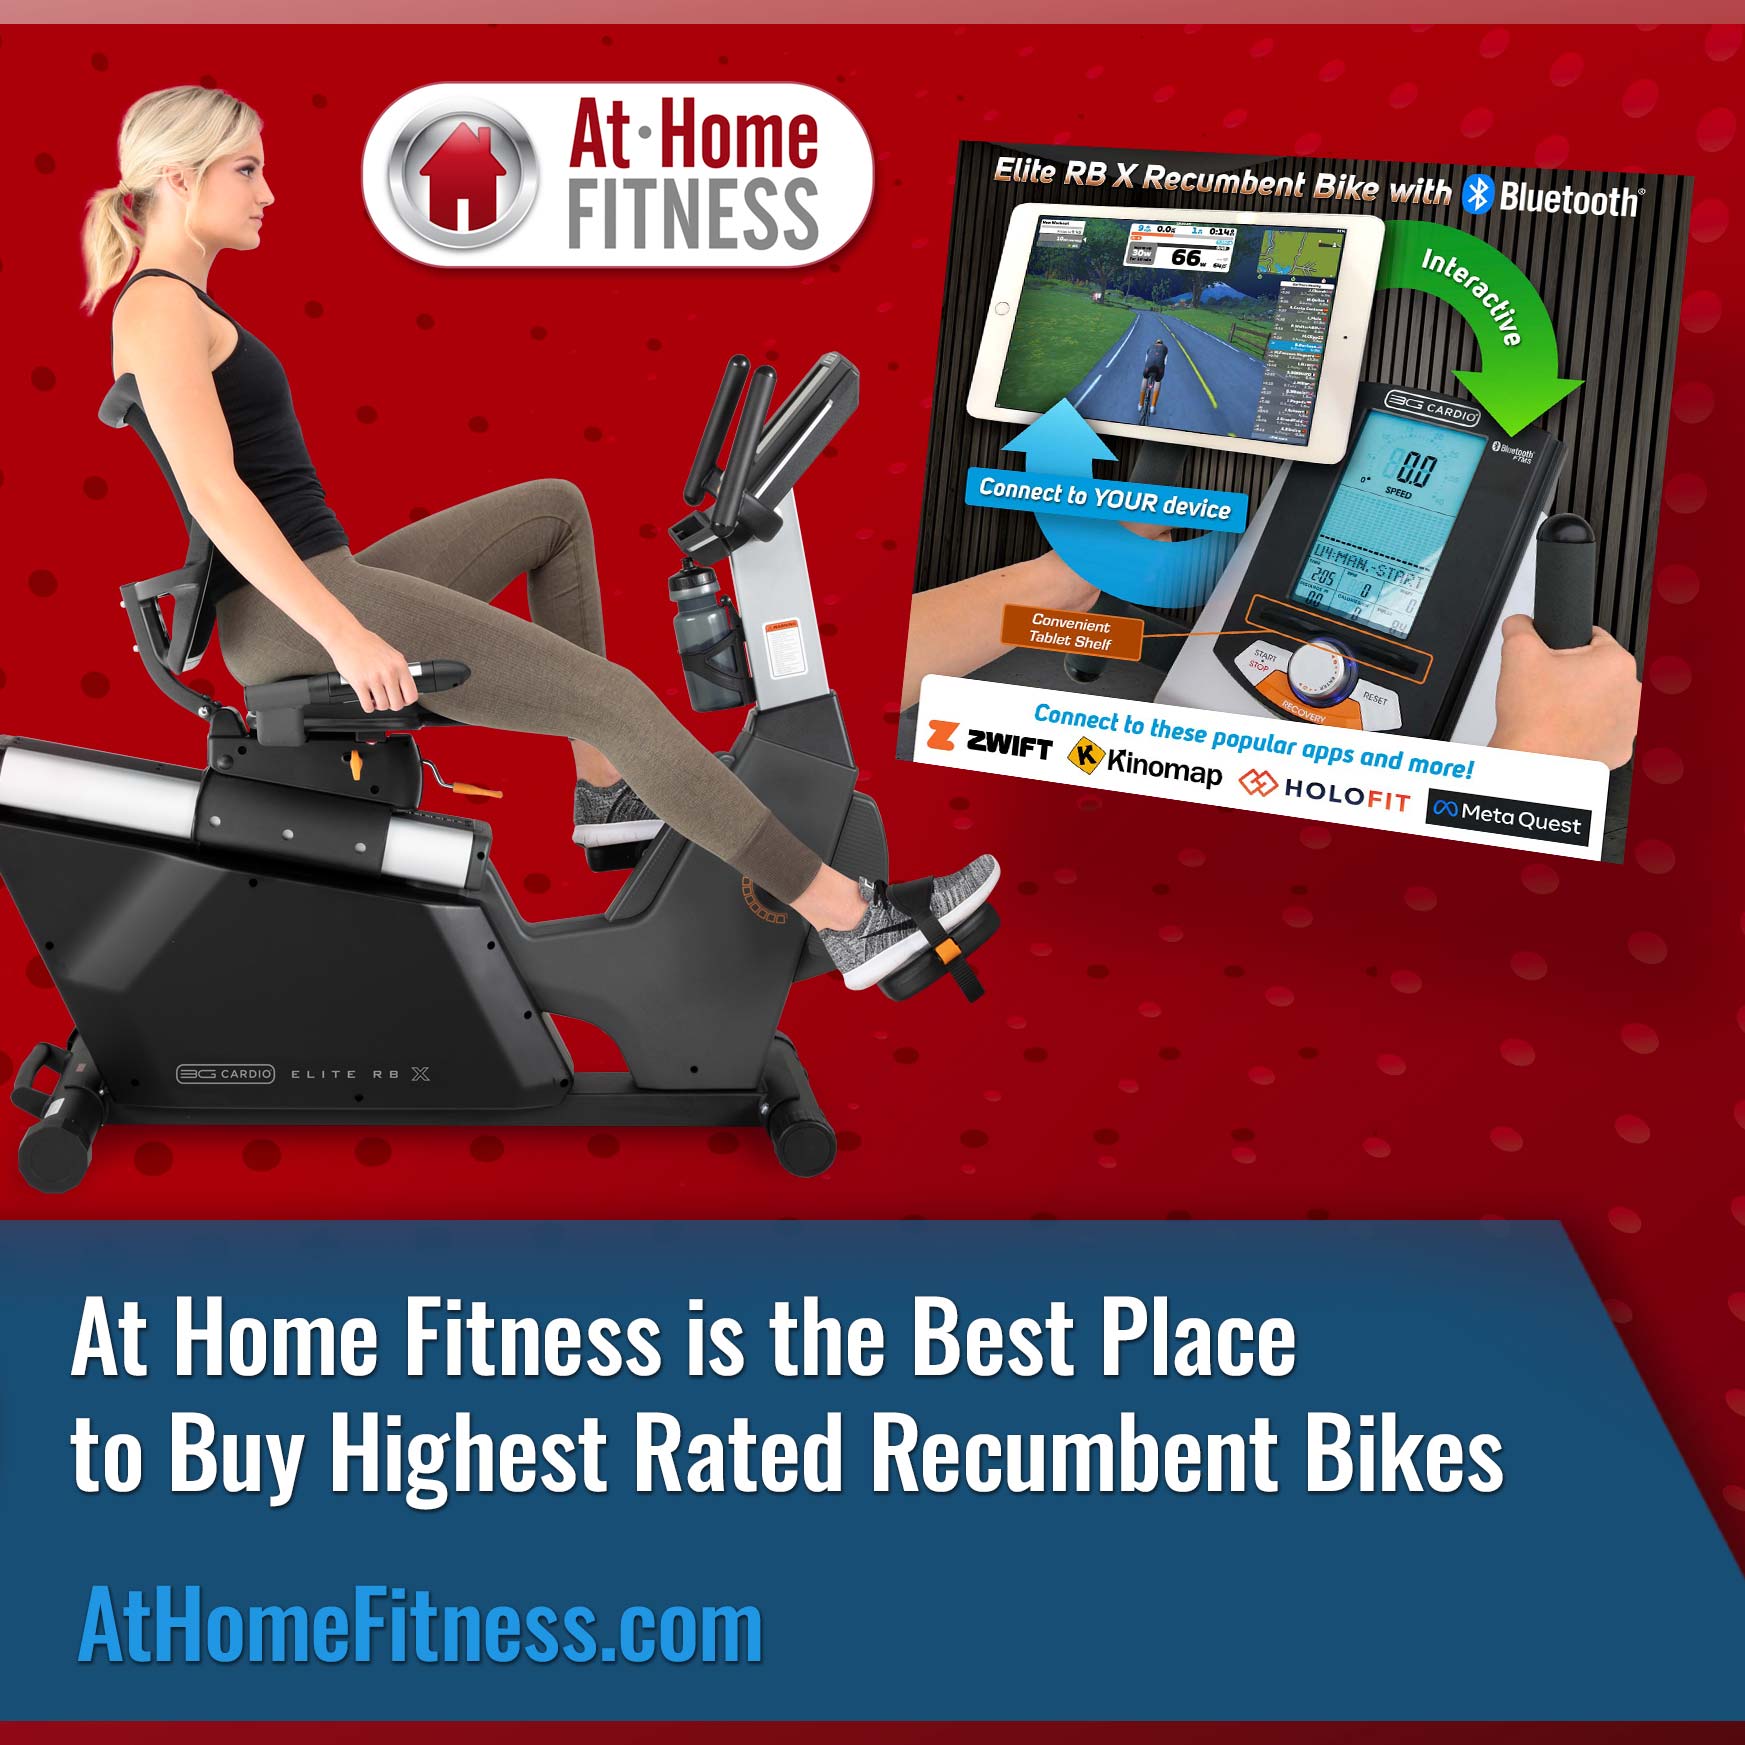 At Home Fitness is best place to buy highest rated recumbent bikes